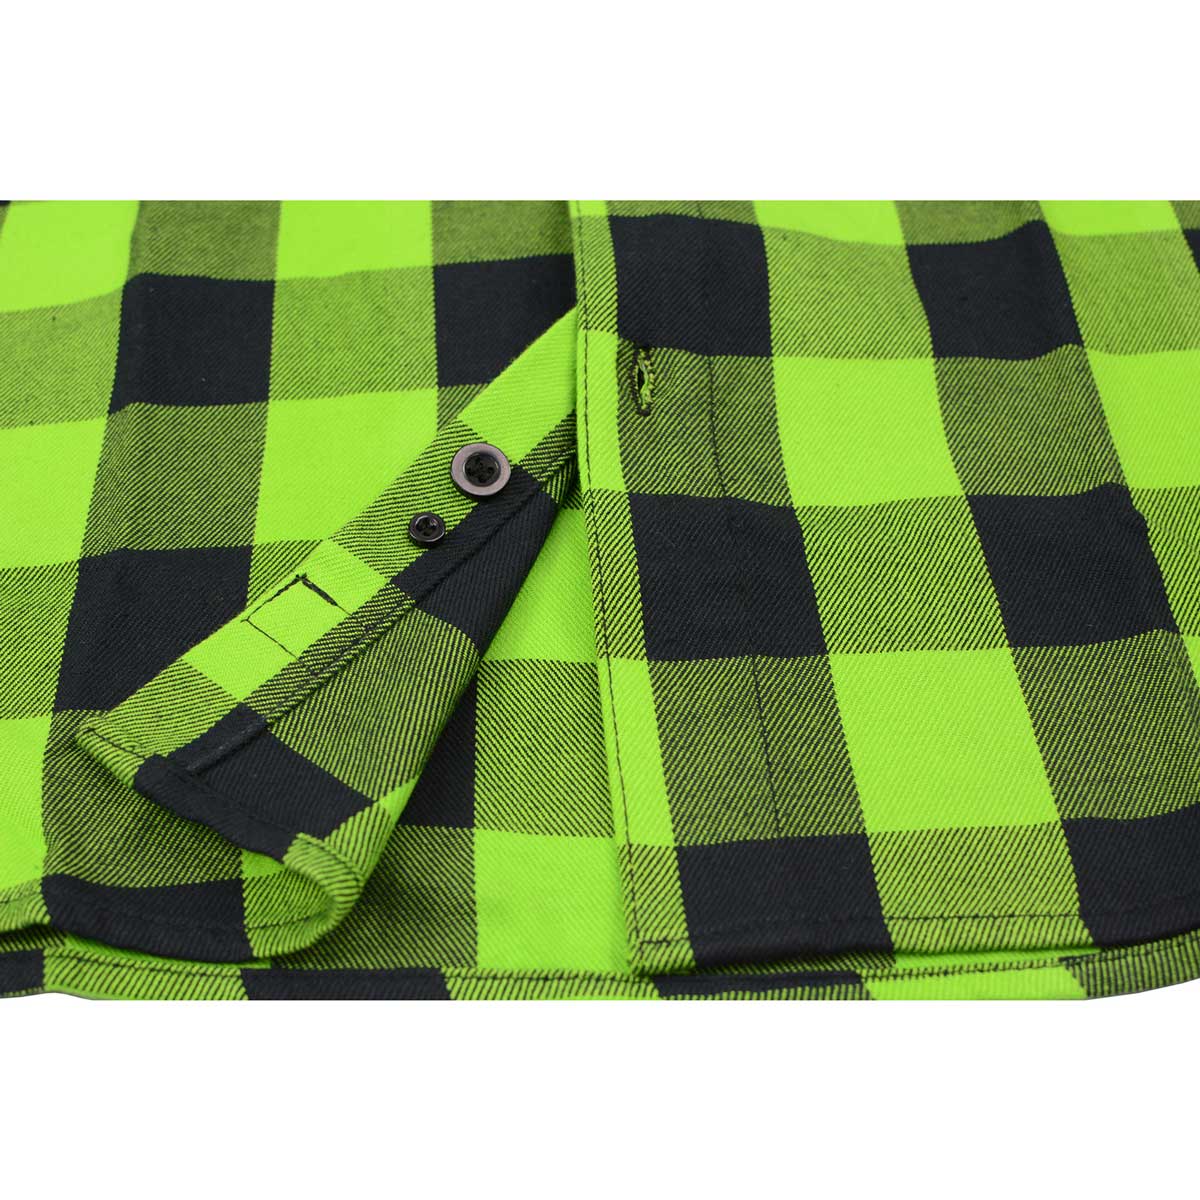 Milwaukee Leather Men's Flannel Plaid Shirt Black and Neon Green Long Sleeve Cotton Button Down Shirt MNG11632